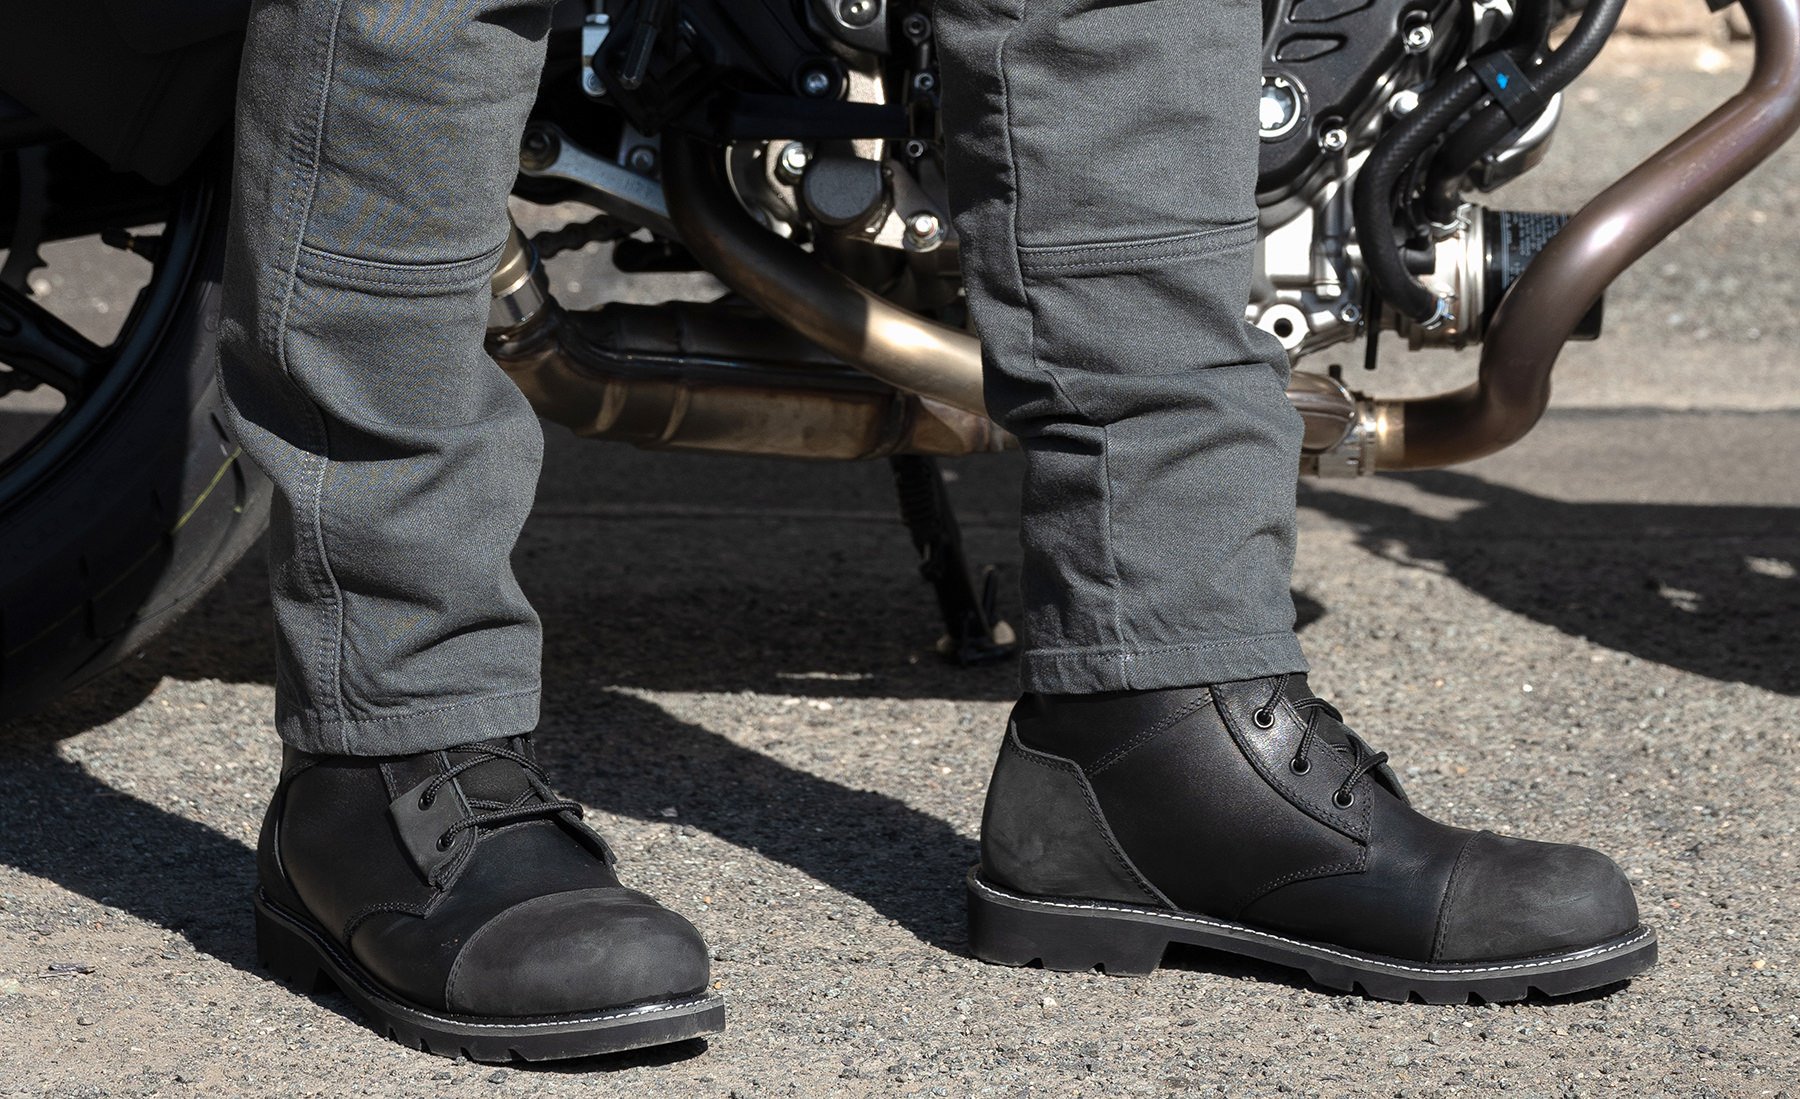 The Merlin Bandit D3O Motorcycle Boots